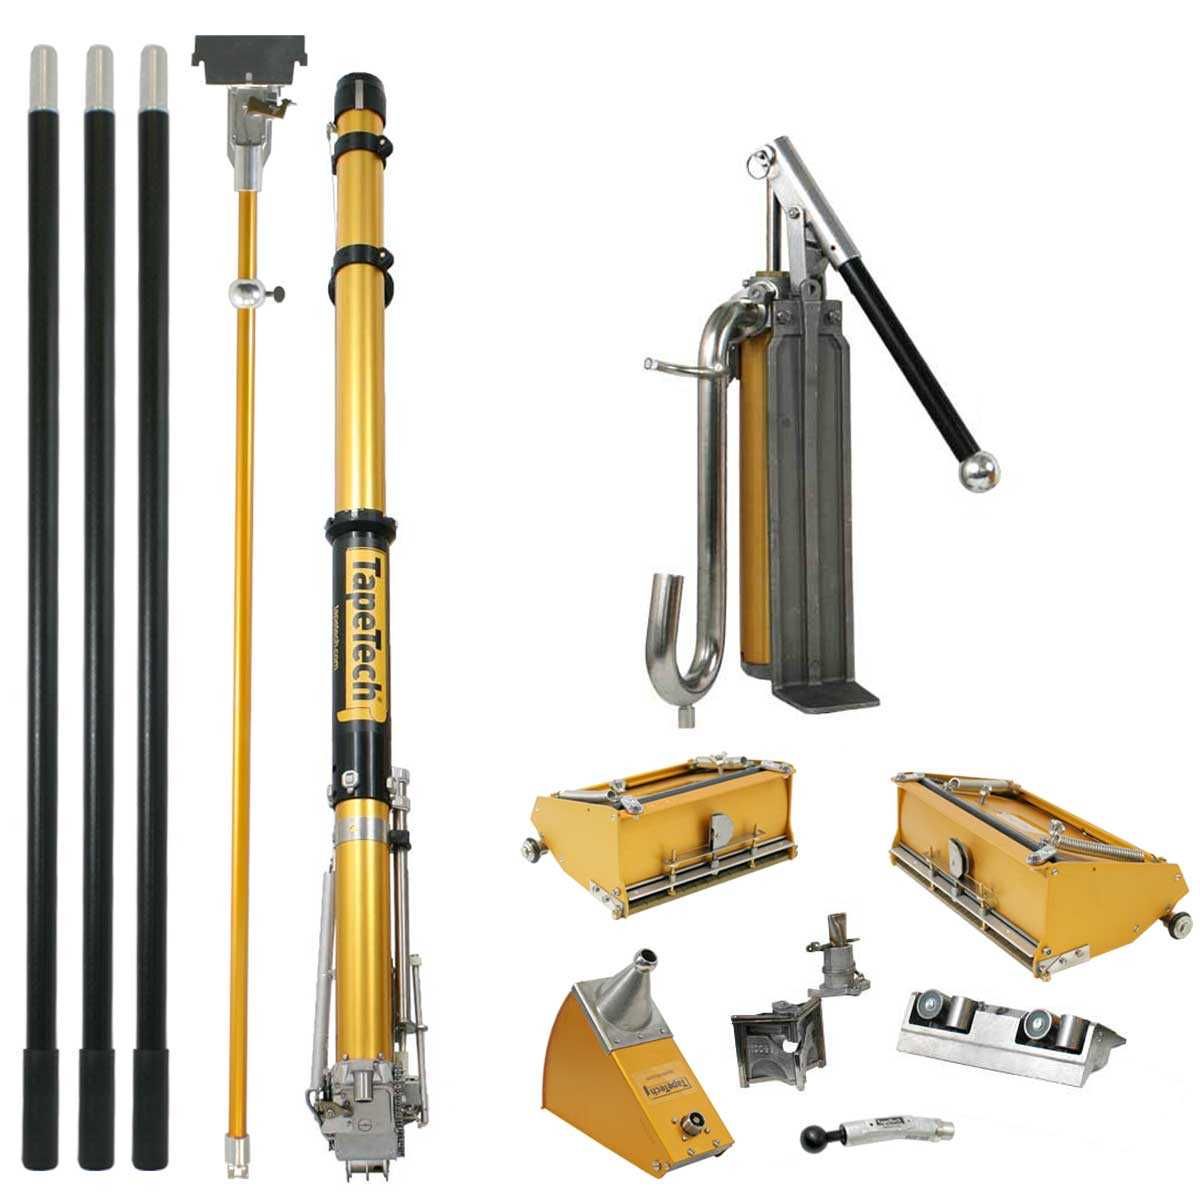 Automatic Taping Tool Sets